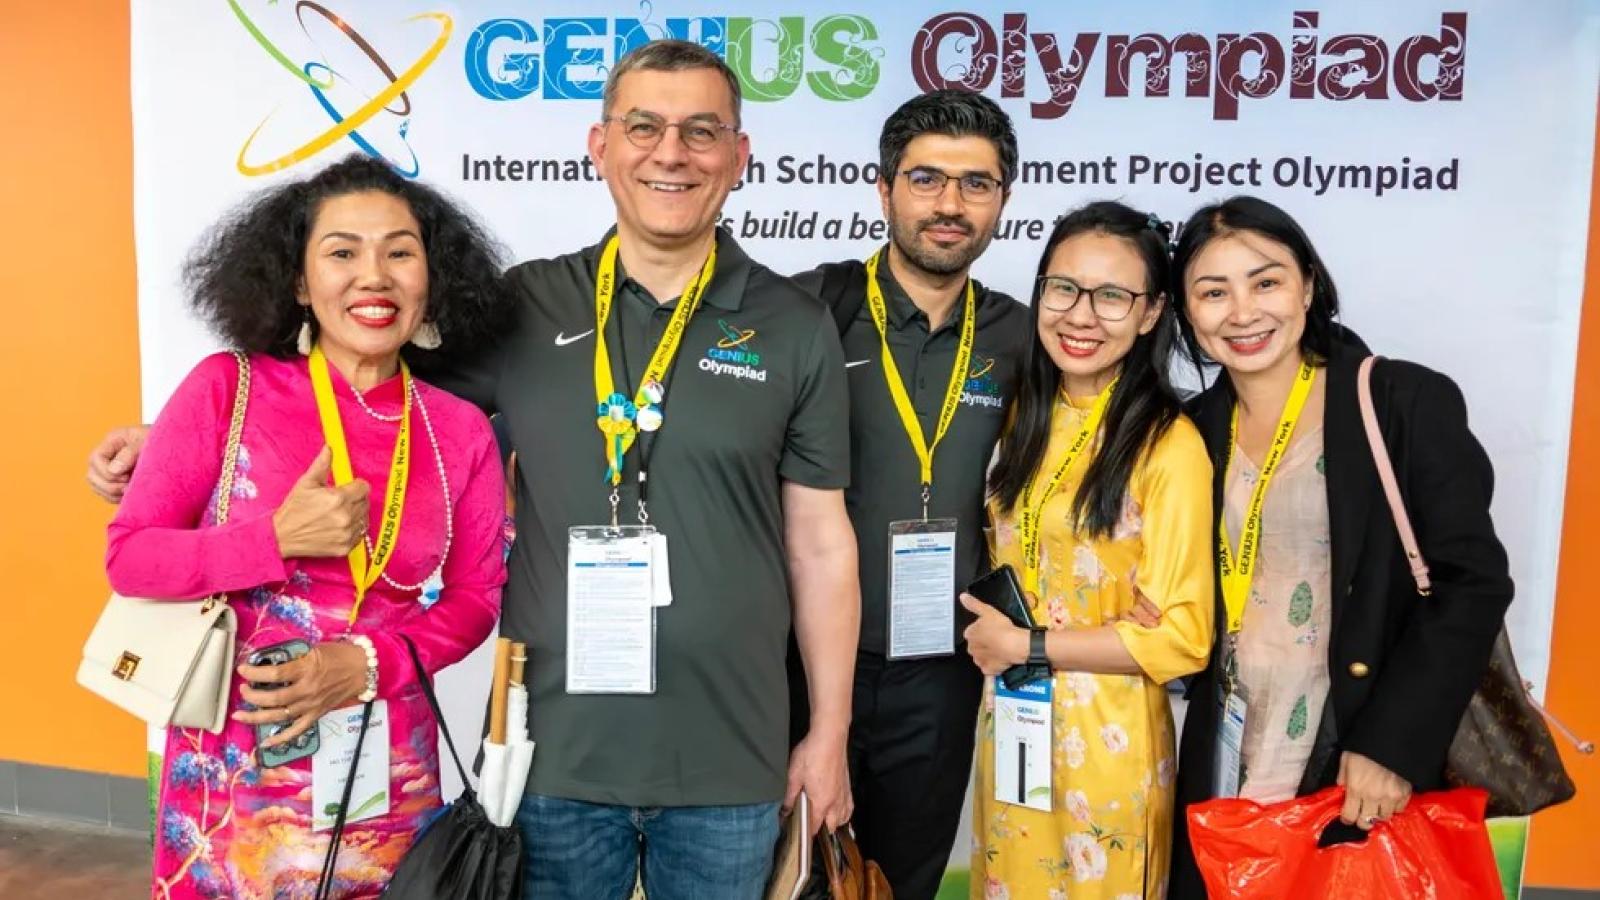 Dr. Fehmi Damkaci stands with four people in front of a Genius Olympiad backdrop